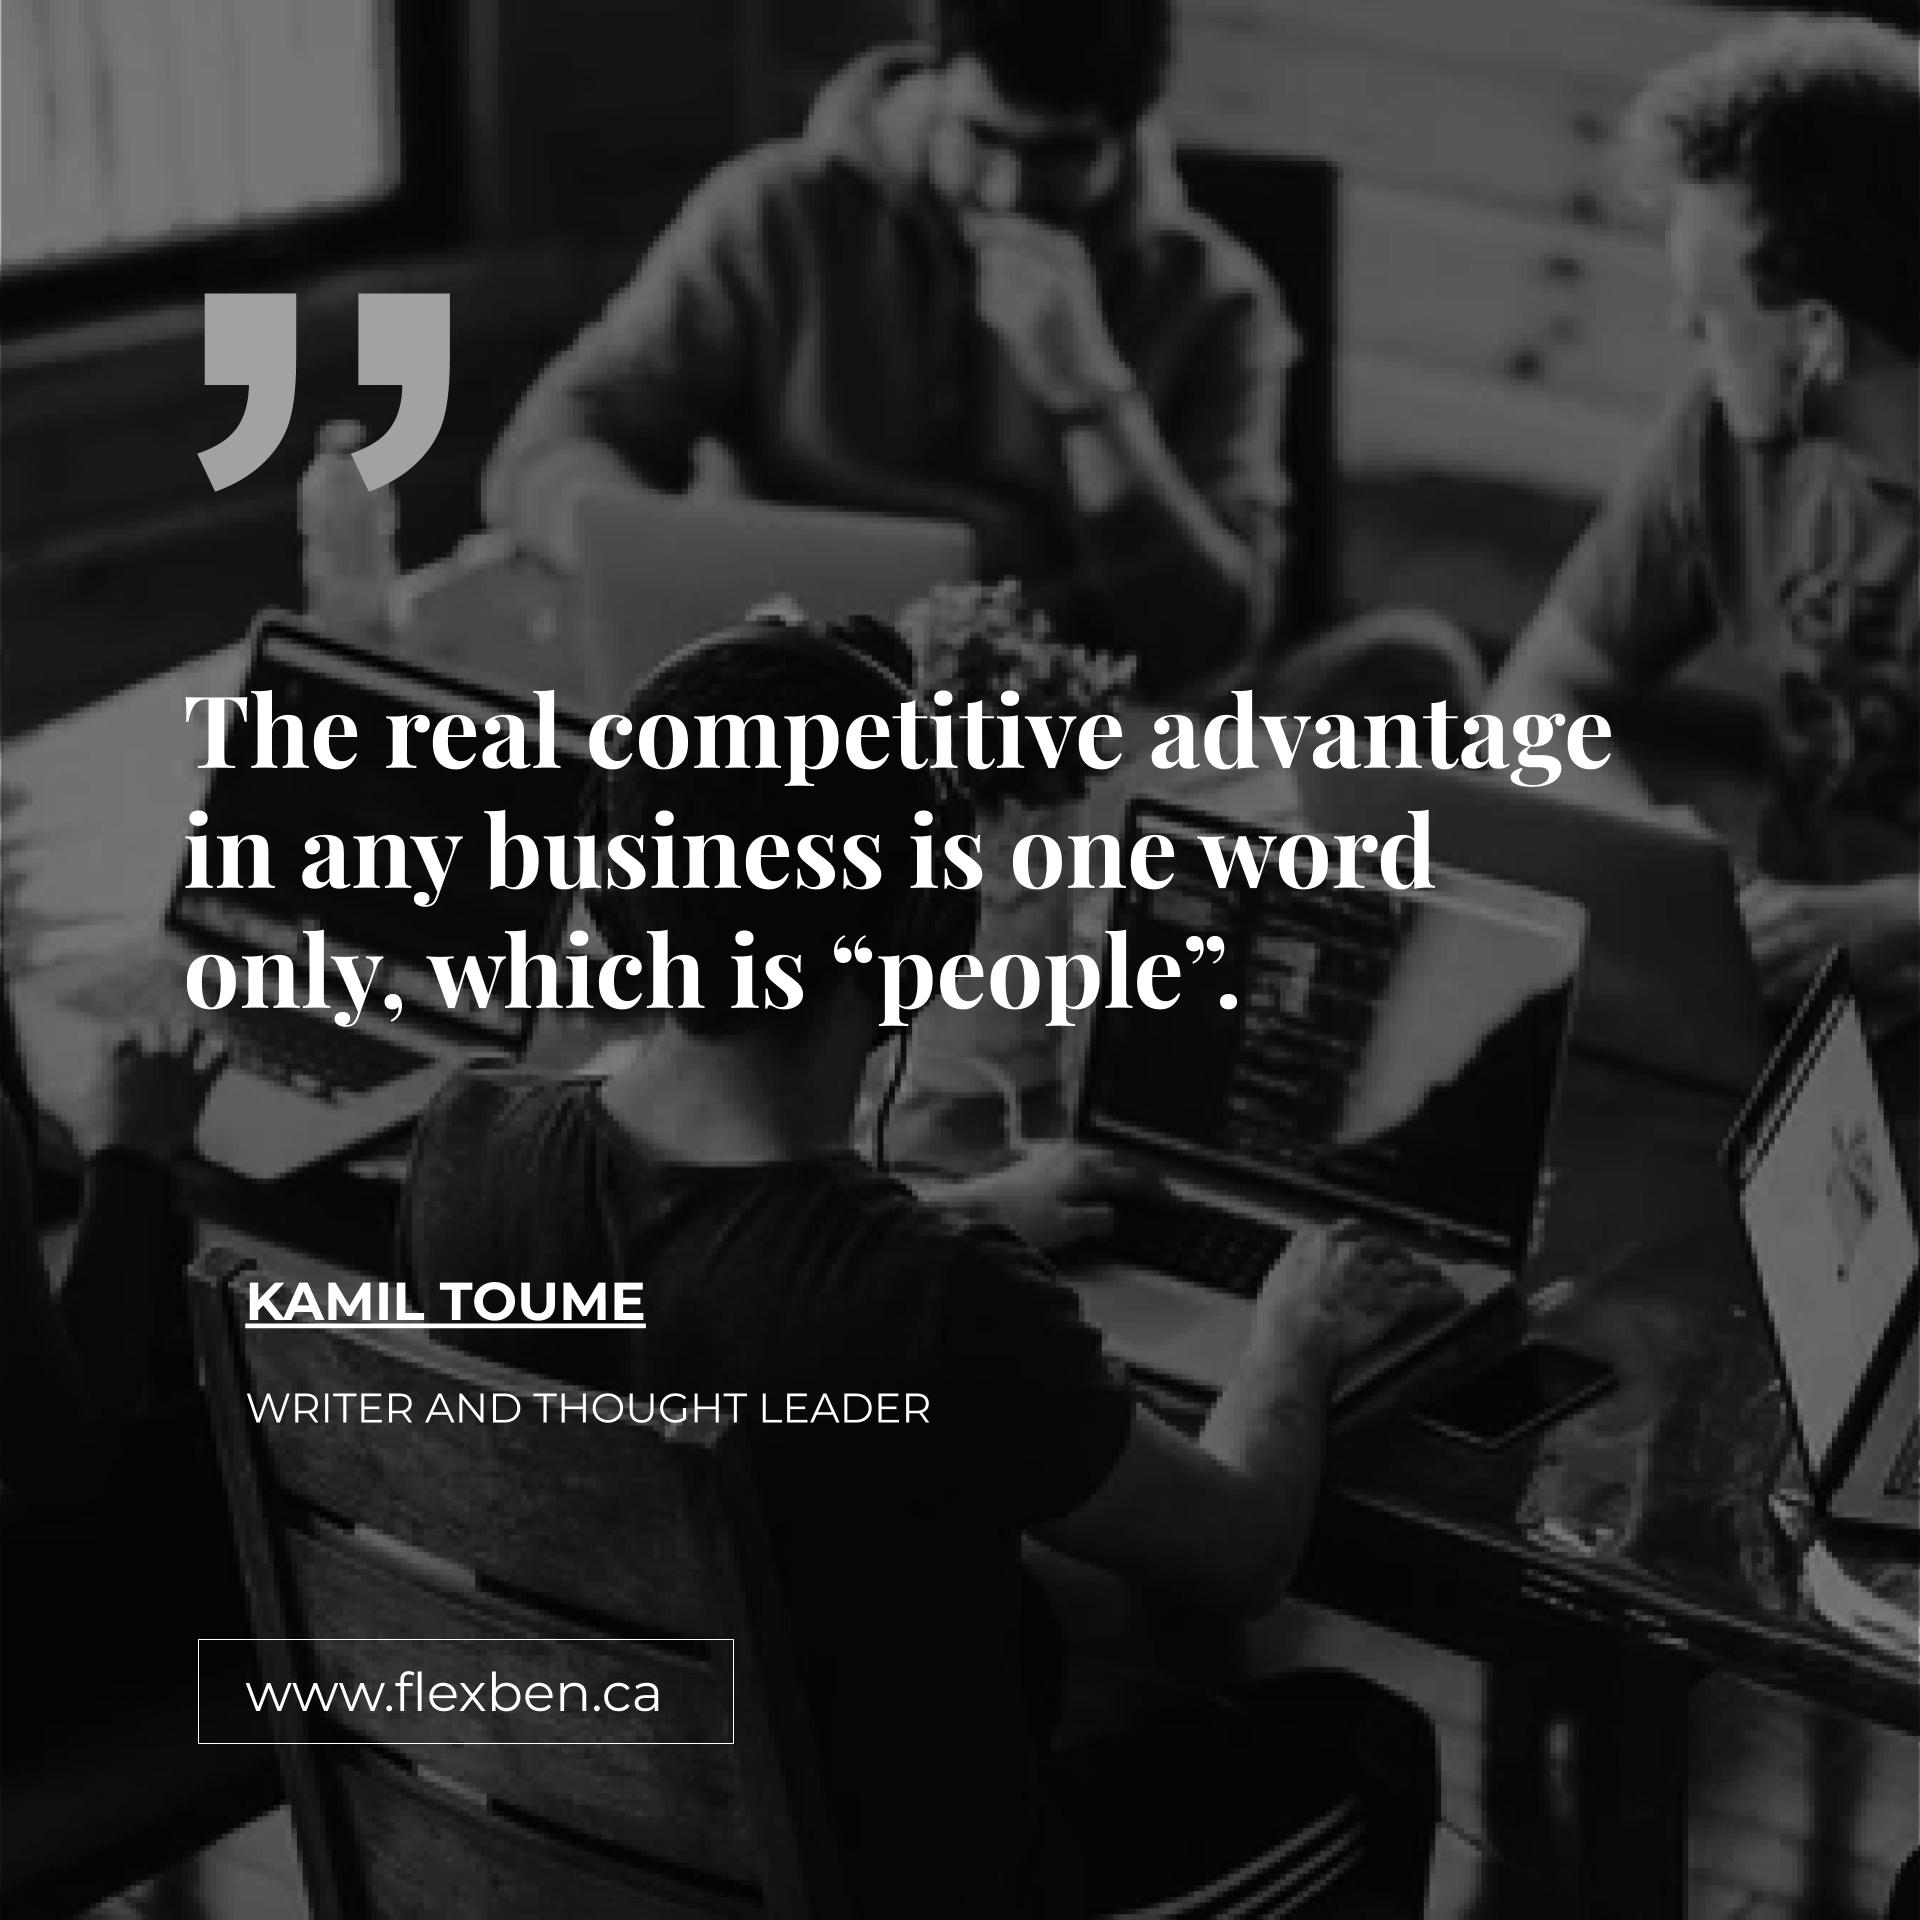 The Real Competitive Advantage In Any Business Is One Word Only, Which Is “People”.